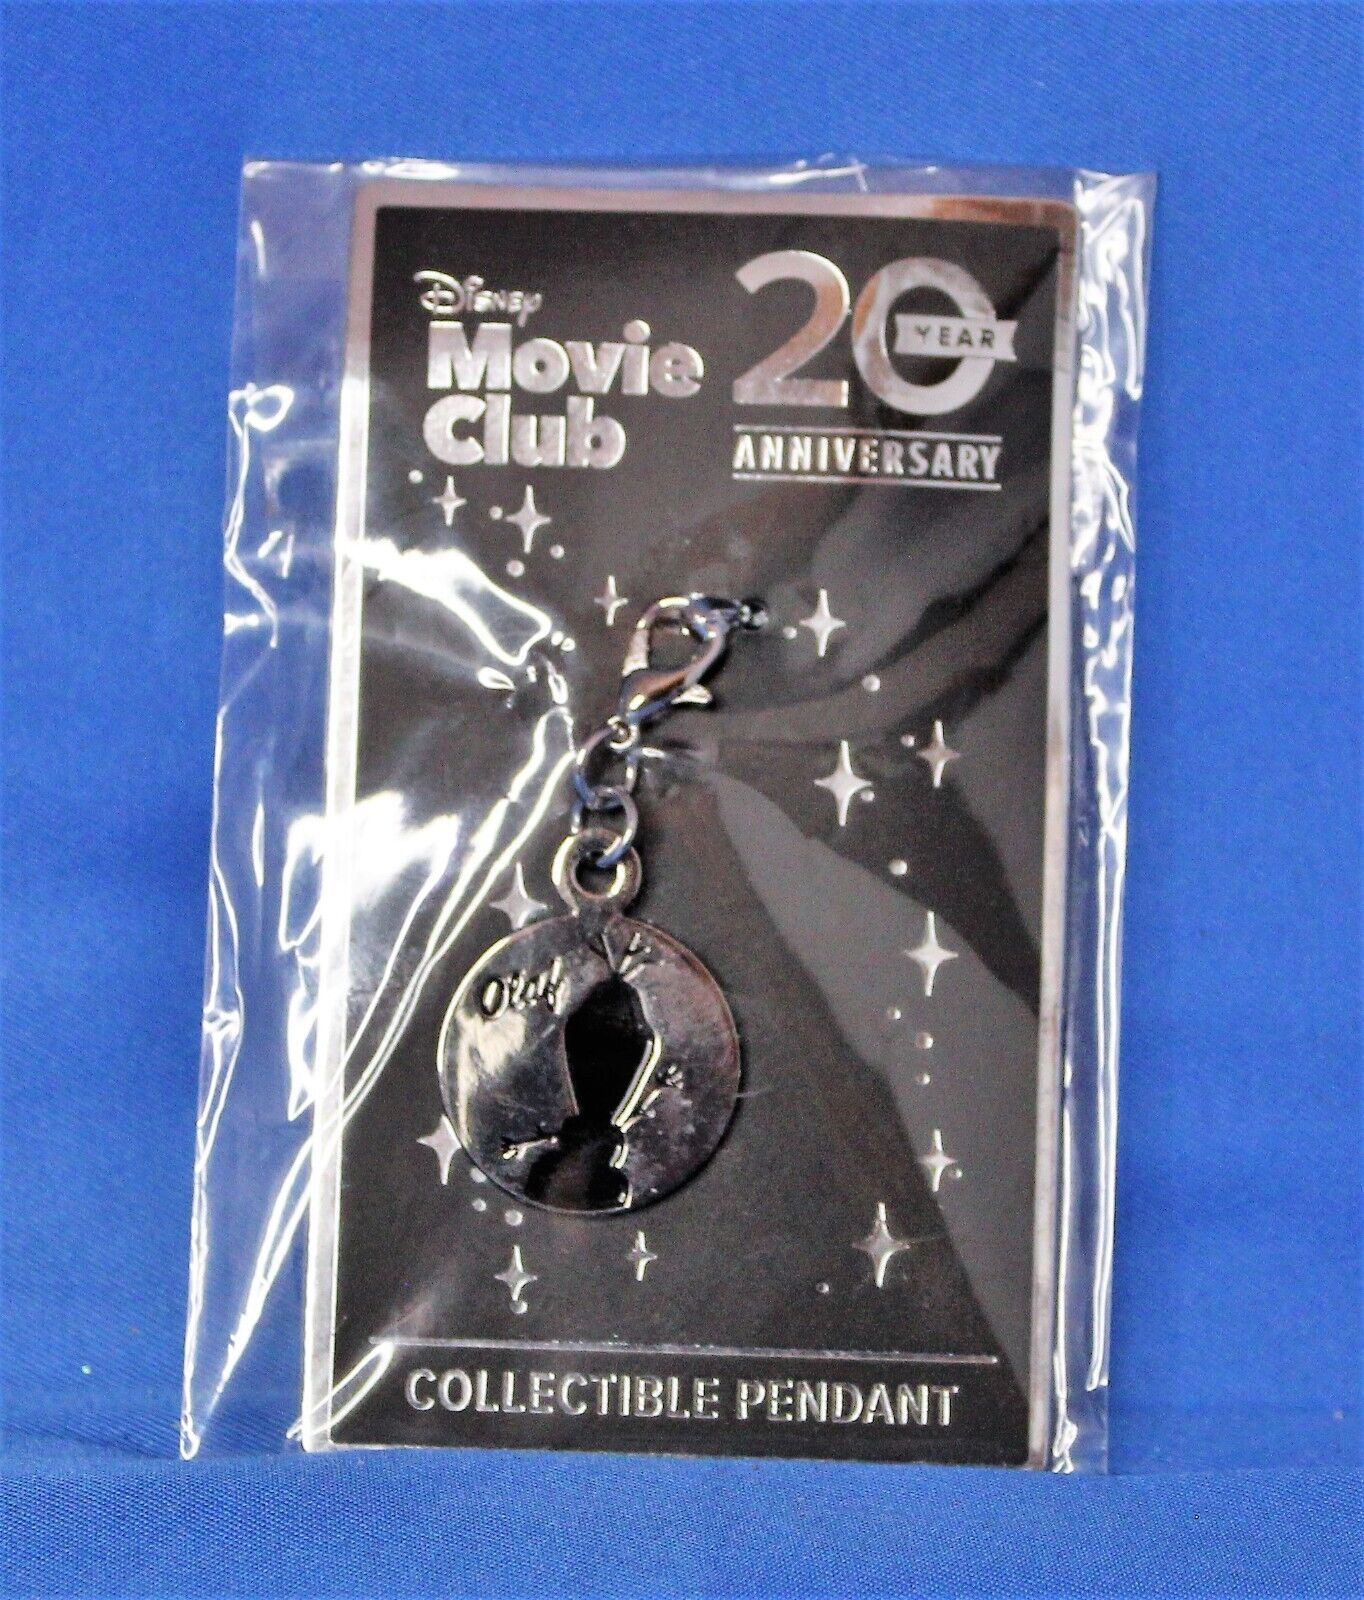 Primary image for Pendant Disney Olaf Movie Club 20 Year Anniversary Collectible